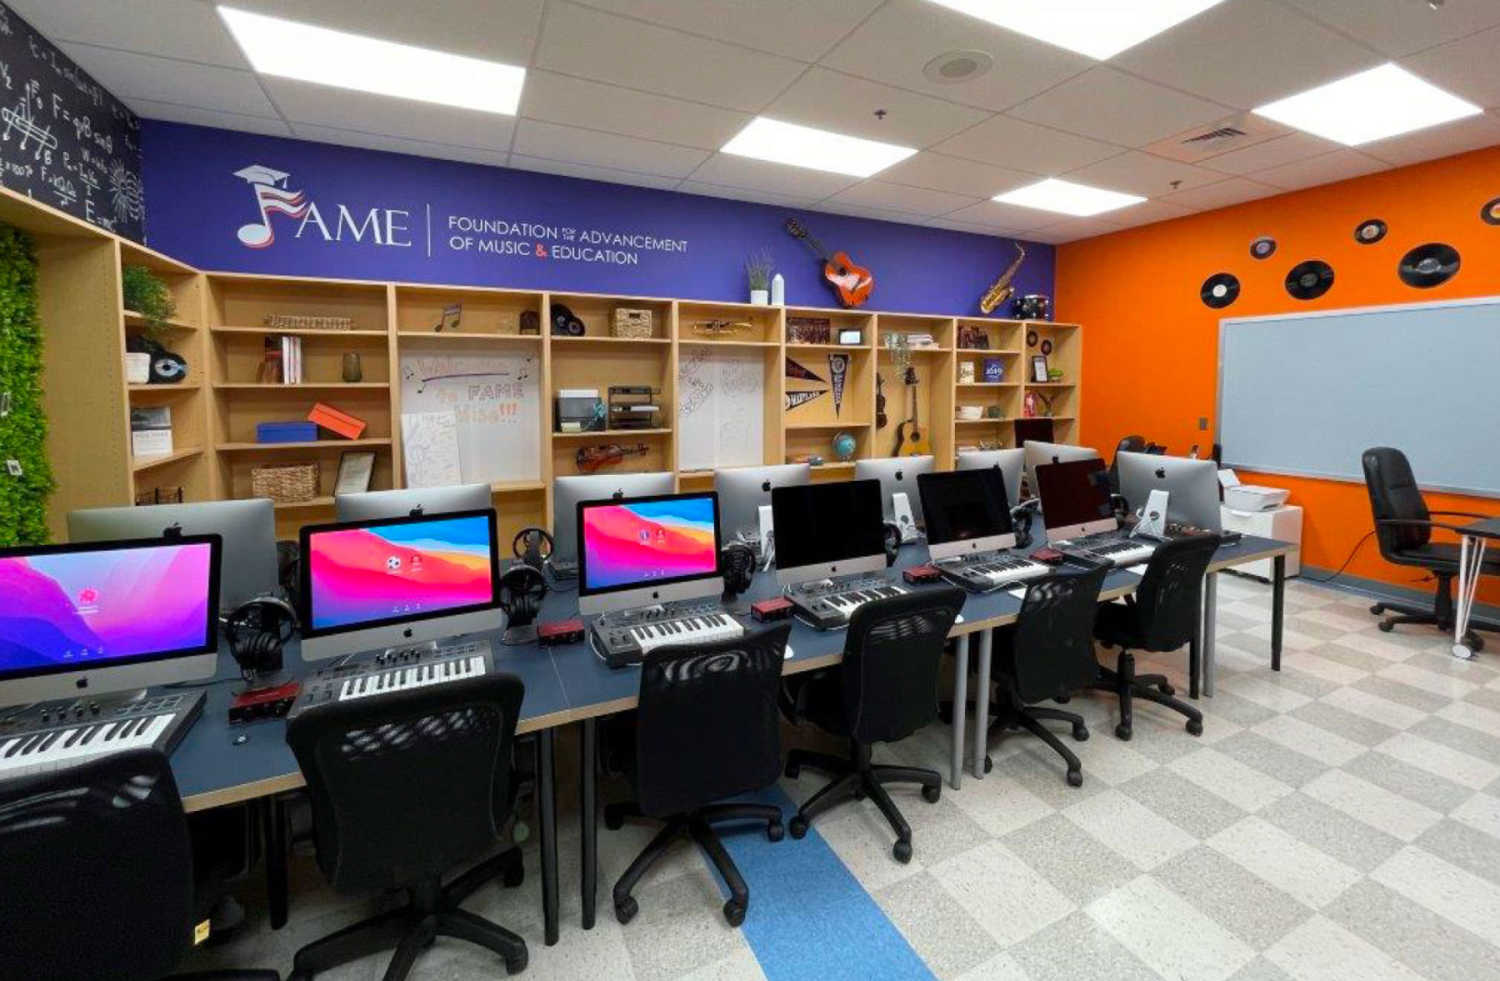 The Neighborhood Design Center's Community Design Works project for the Foundation for the Advancement of Music and Education (FAME), a nonprofit music academy in Prince George's County.